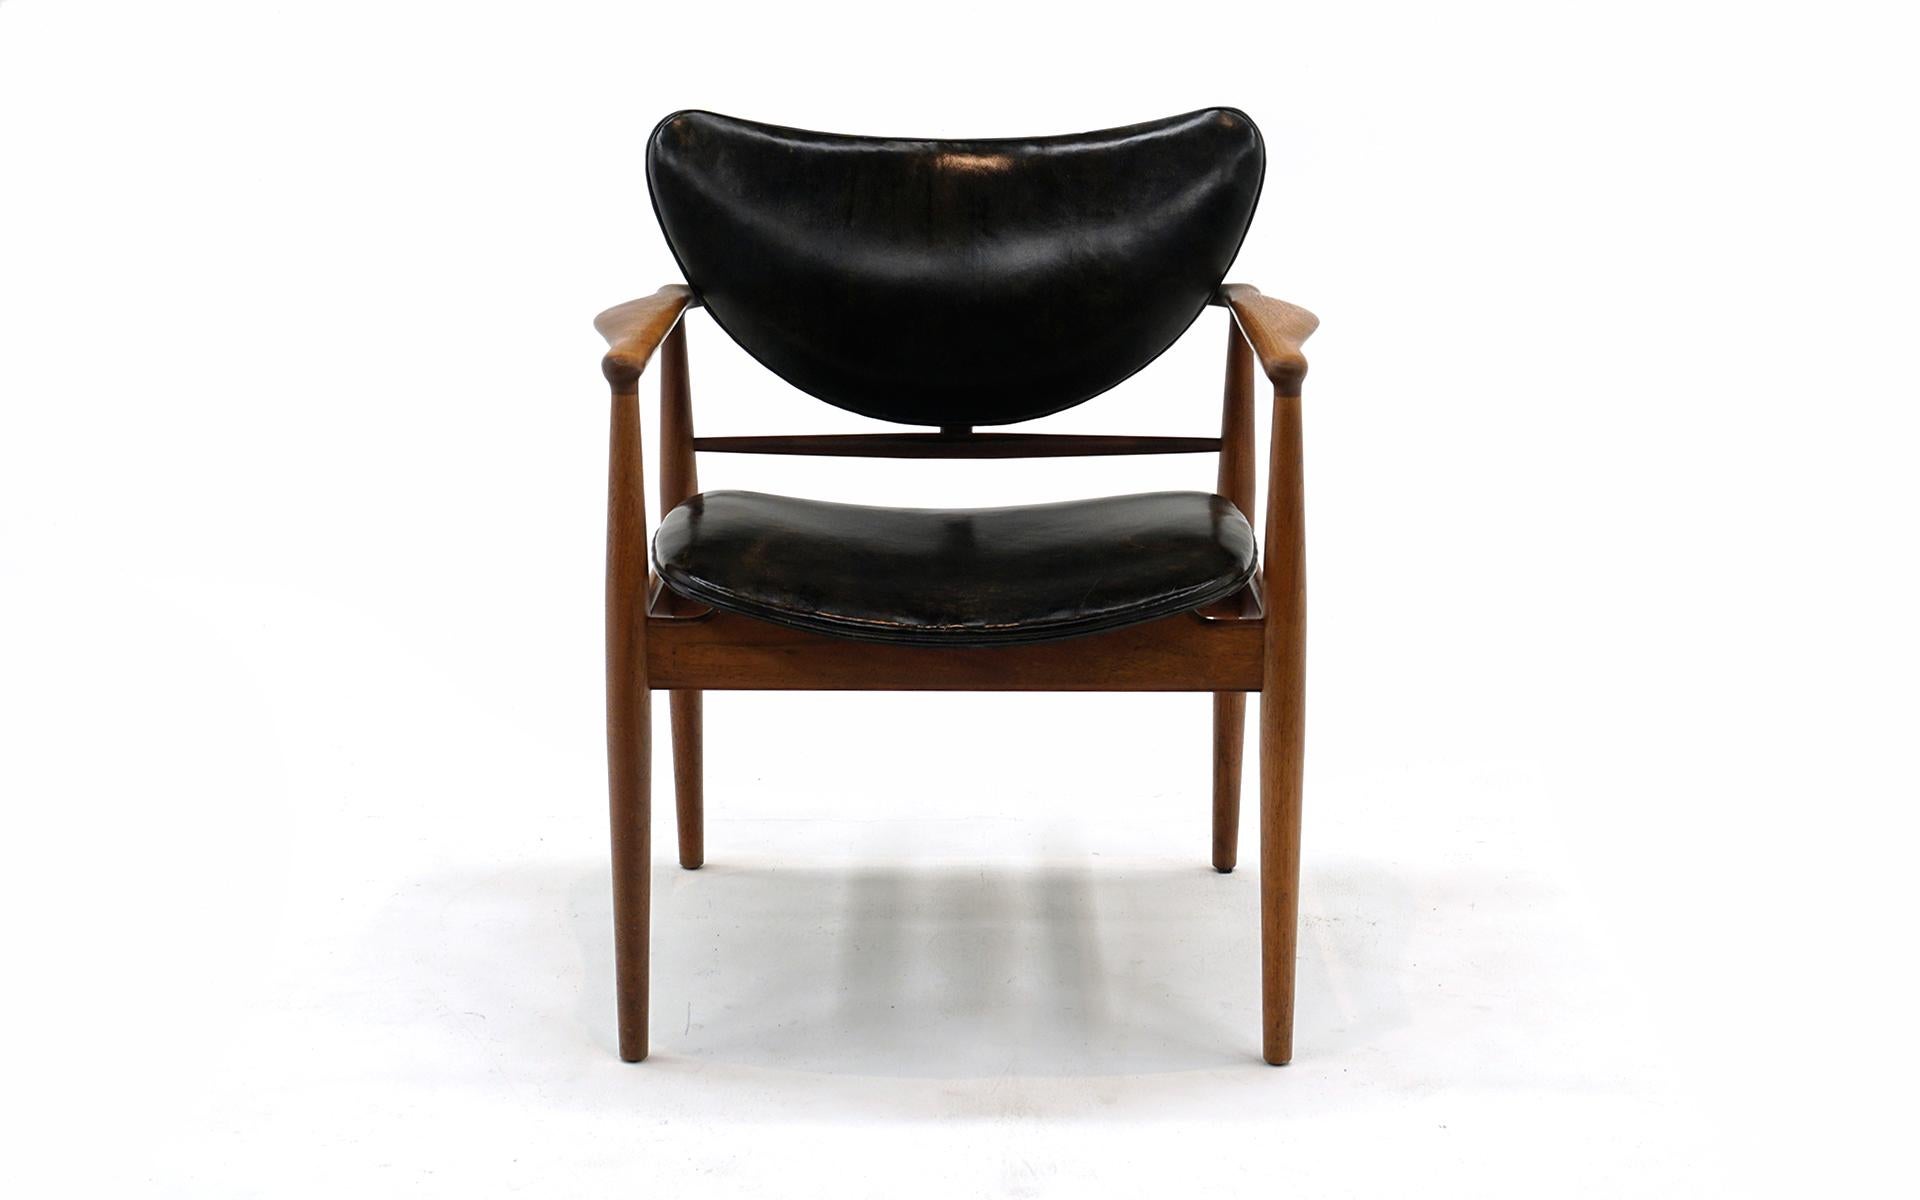 Amazingly well preserved original Finn Juhl Model 48 armchair manufactured by Baker, 1950s.  Original finish with warm patina with original black leather showing what we consider attractive wear.  No tears, holes, or repairs.  This is a great